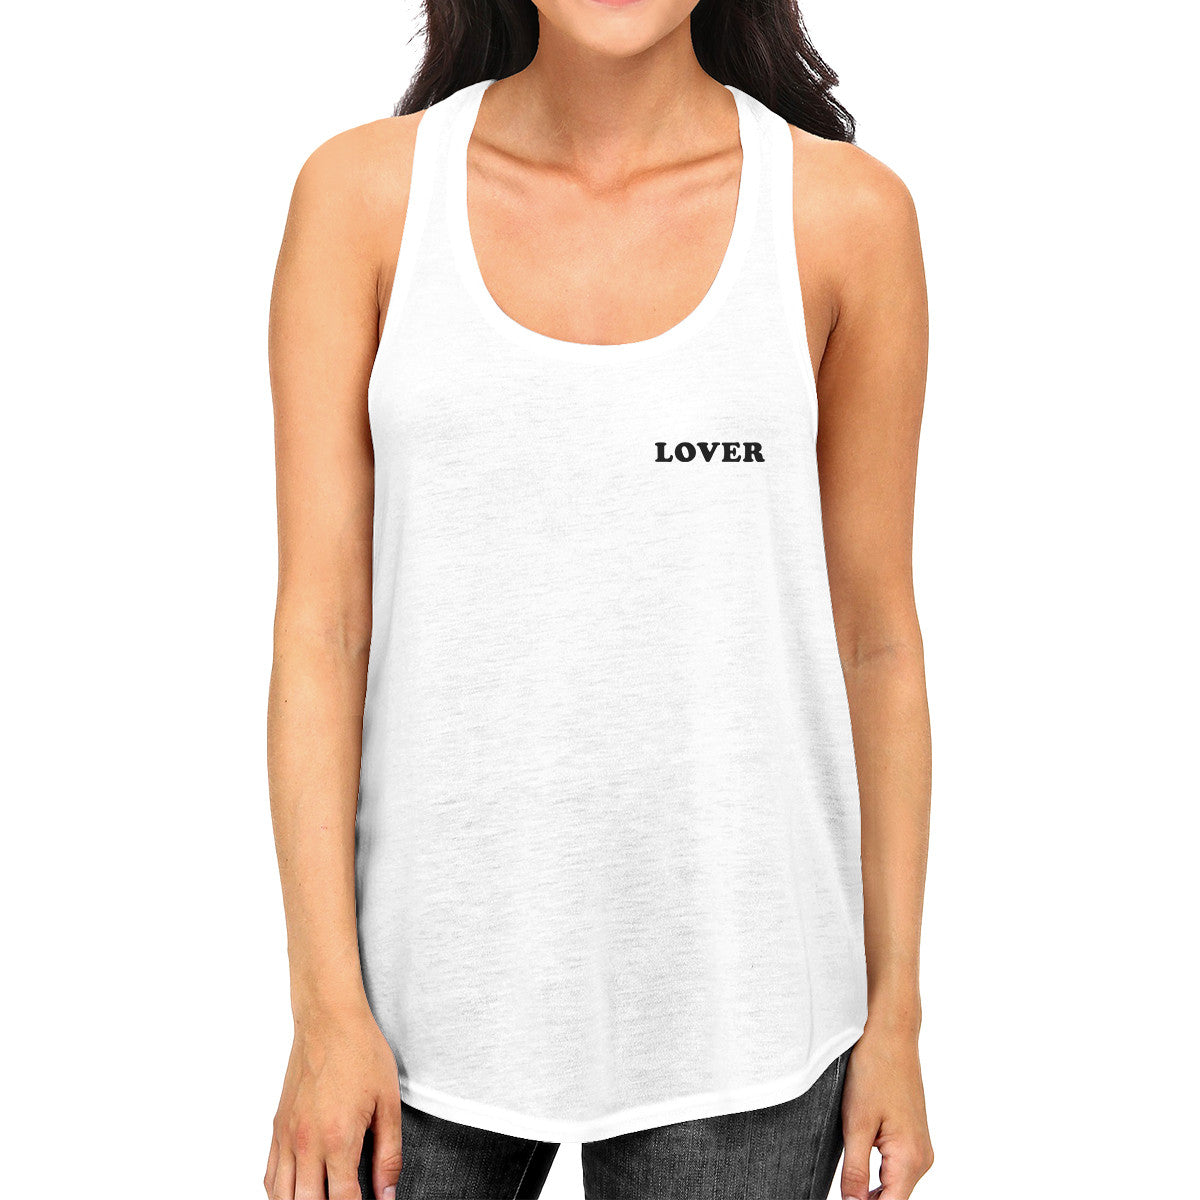 Lover Womens Racerback Tank Top Gift Idea For Valentines Day - 365 IN LOVE  - Matching Gifts Ideas